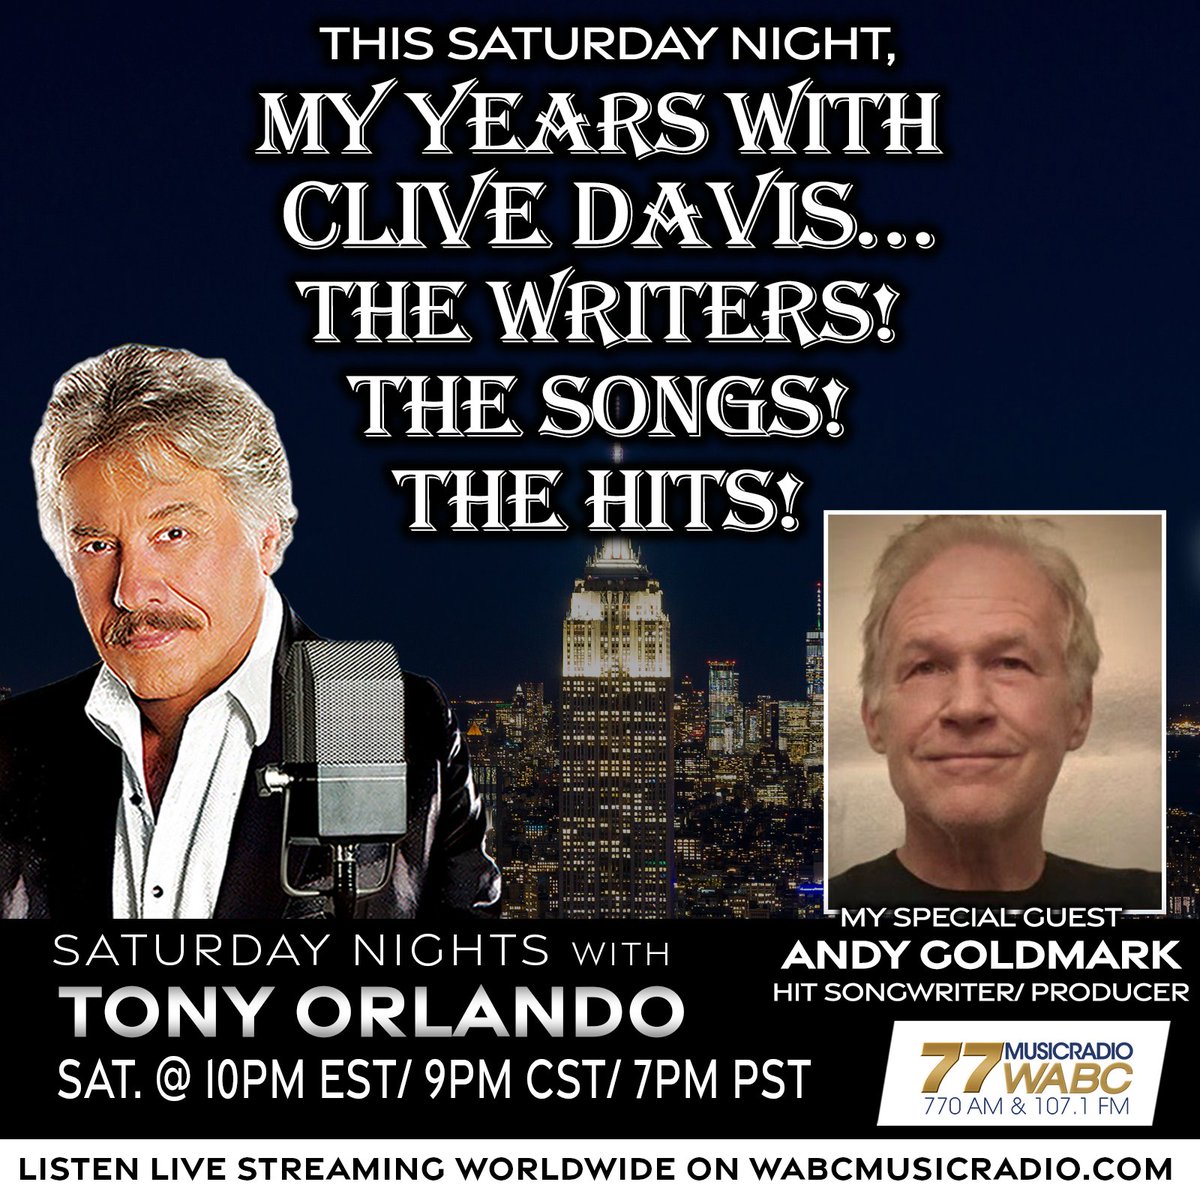 TOMORROW at 10PM:  My Years With Clive Davis… The Writers! The Songs! The Hits!

Host @TonyOrlando will have guest Andy Goldmark on the show!

Join us TOMORROW from 10PM-midnight on wabcmusicradio.com, 770 AM, or on the 77 WABC app!

#77WABCRadio #Music #TonyOrlando